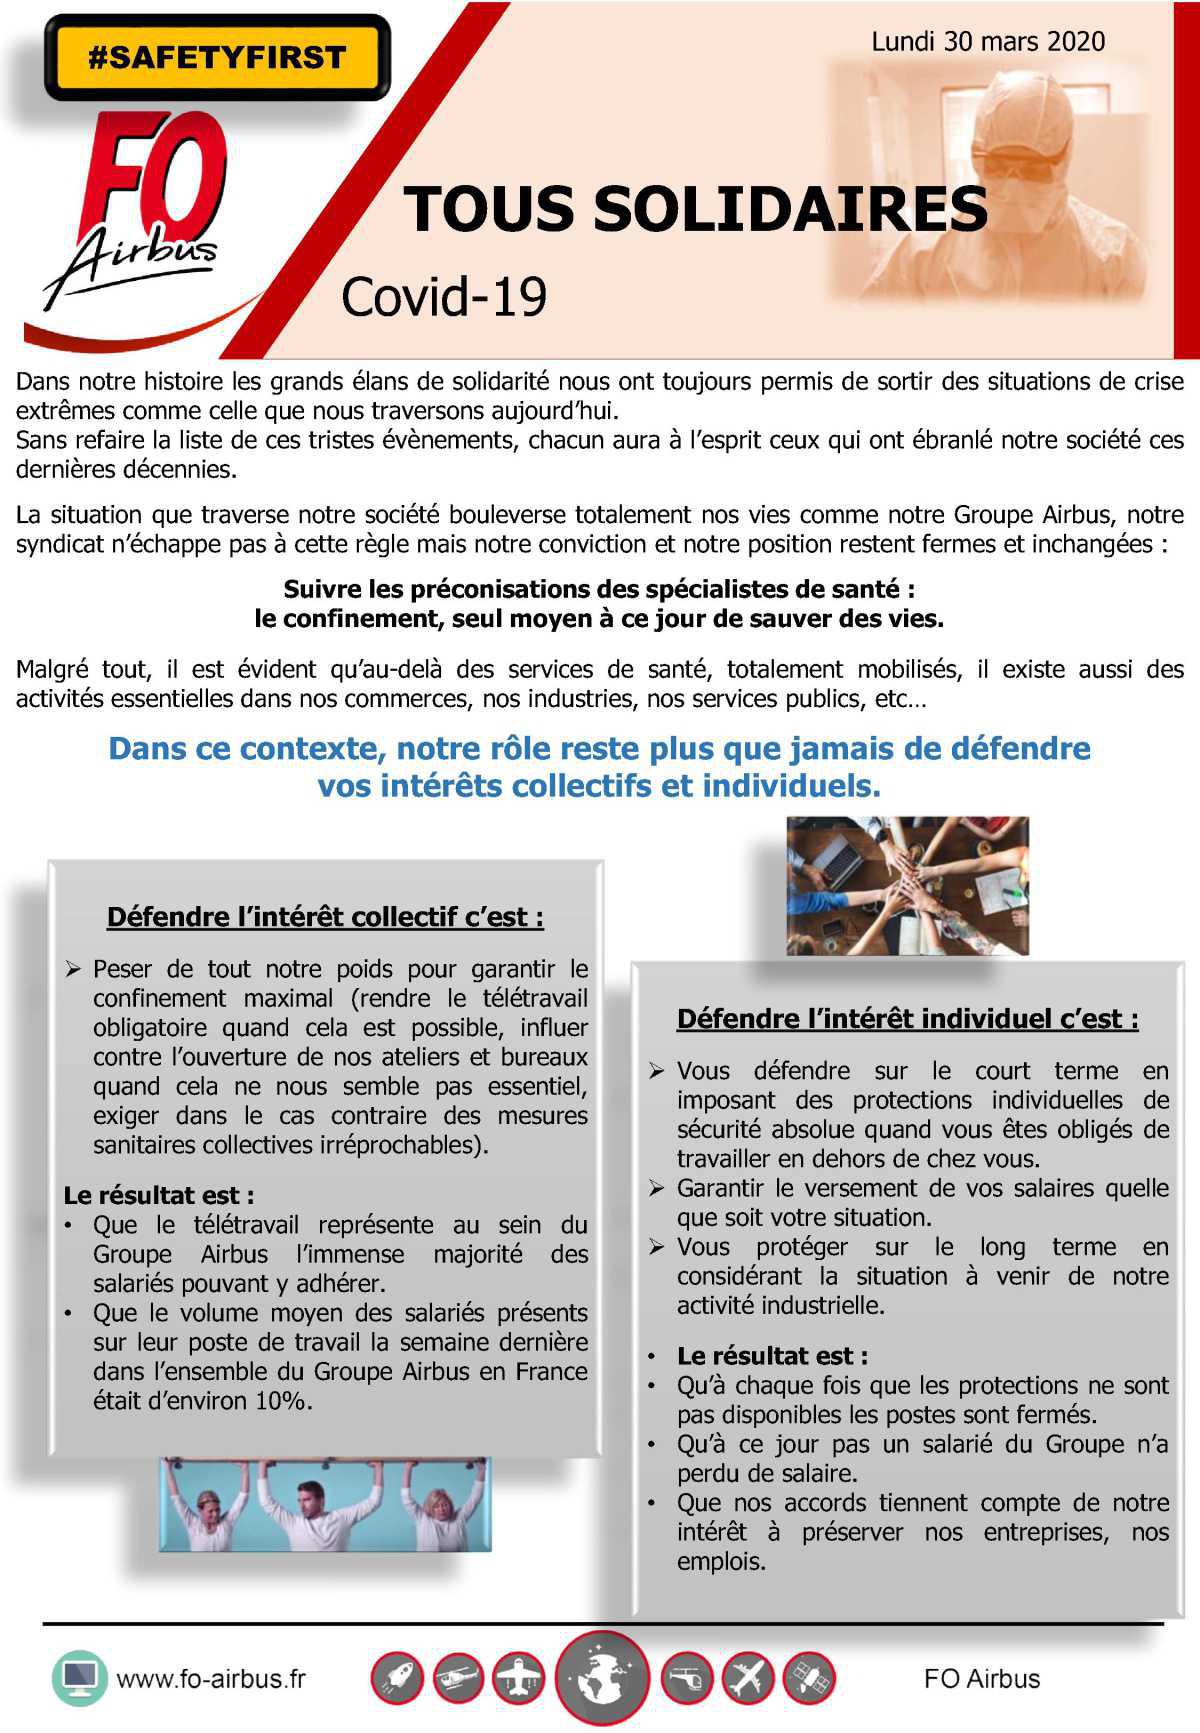 Tous solidaires / Covid 19